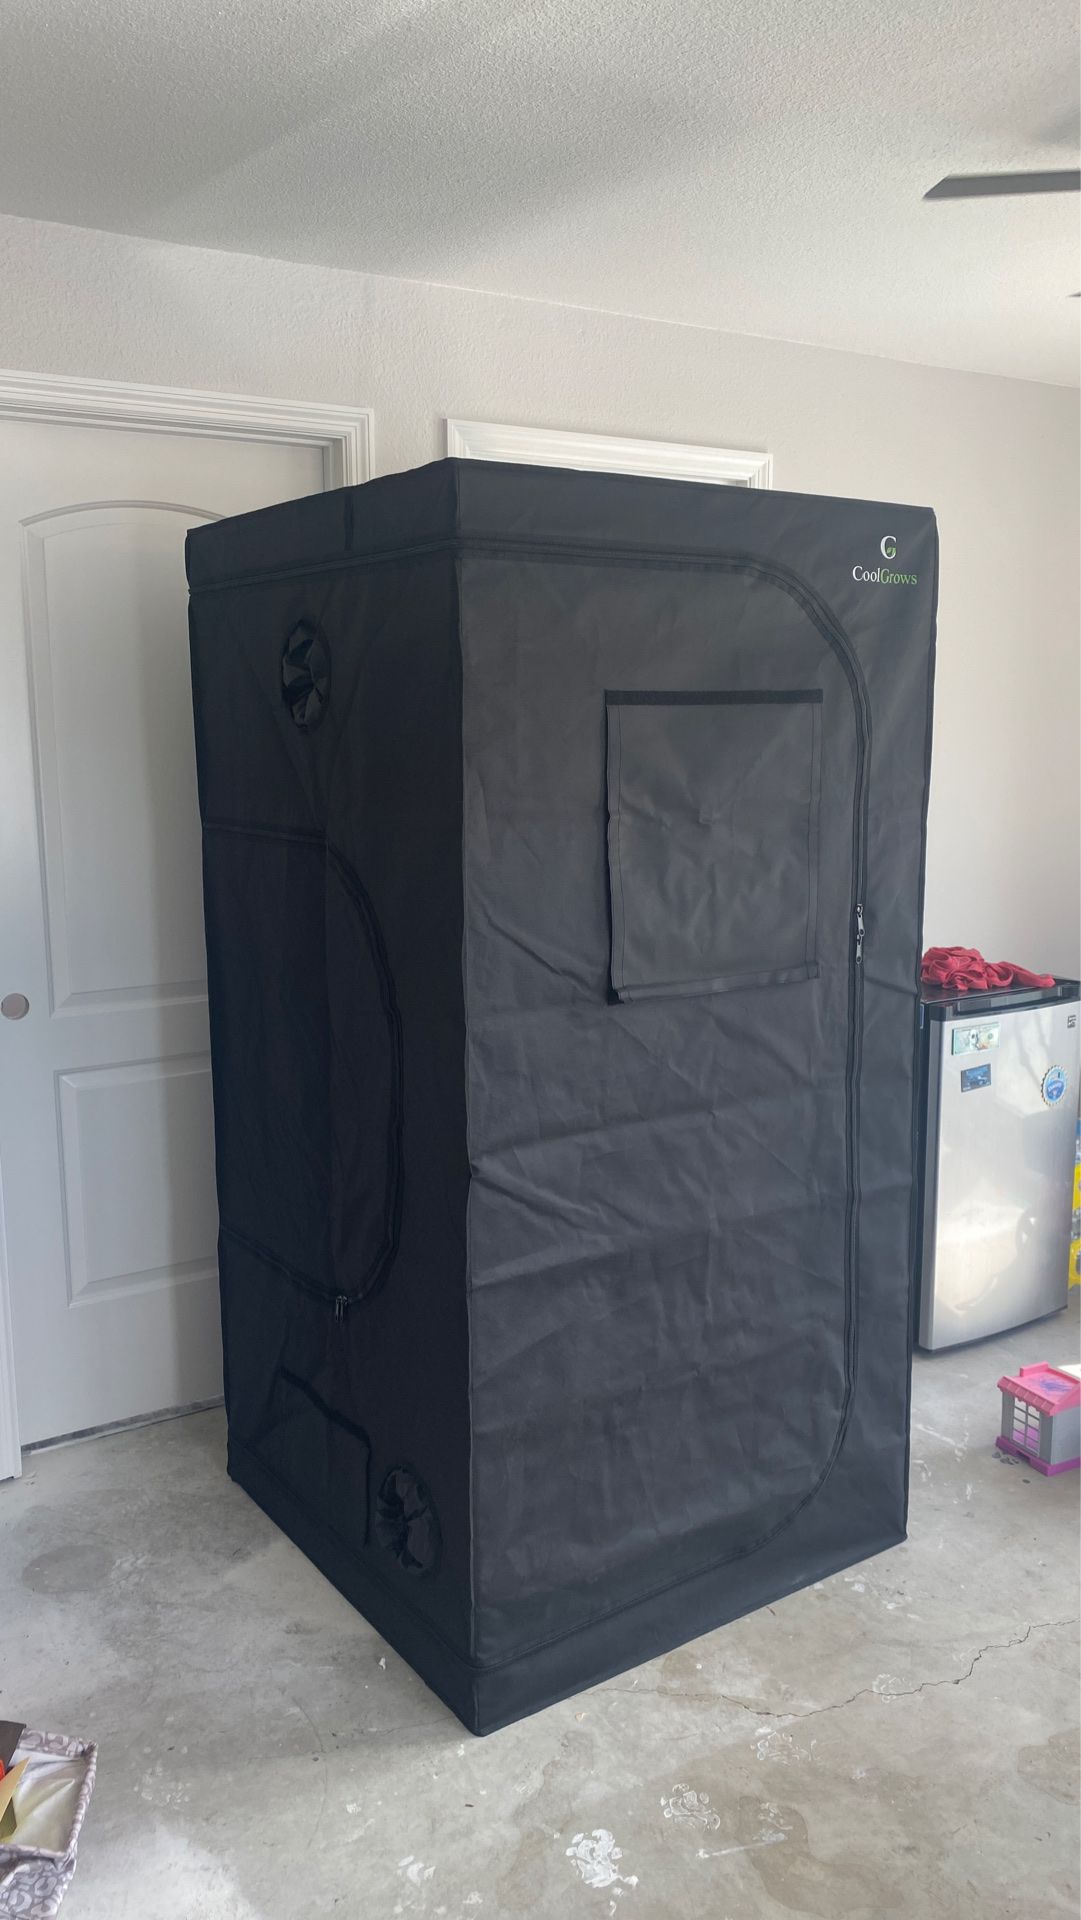 Brand new grow tent asking 80